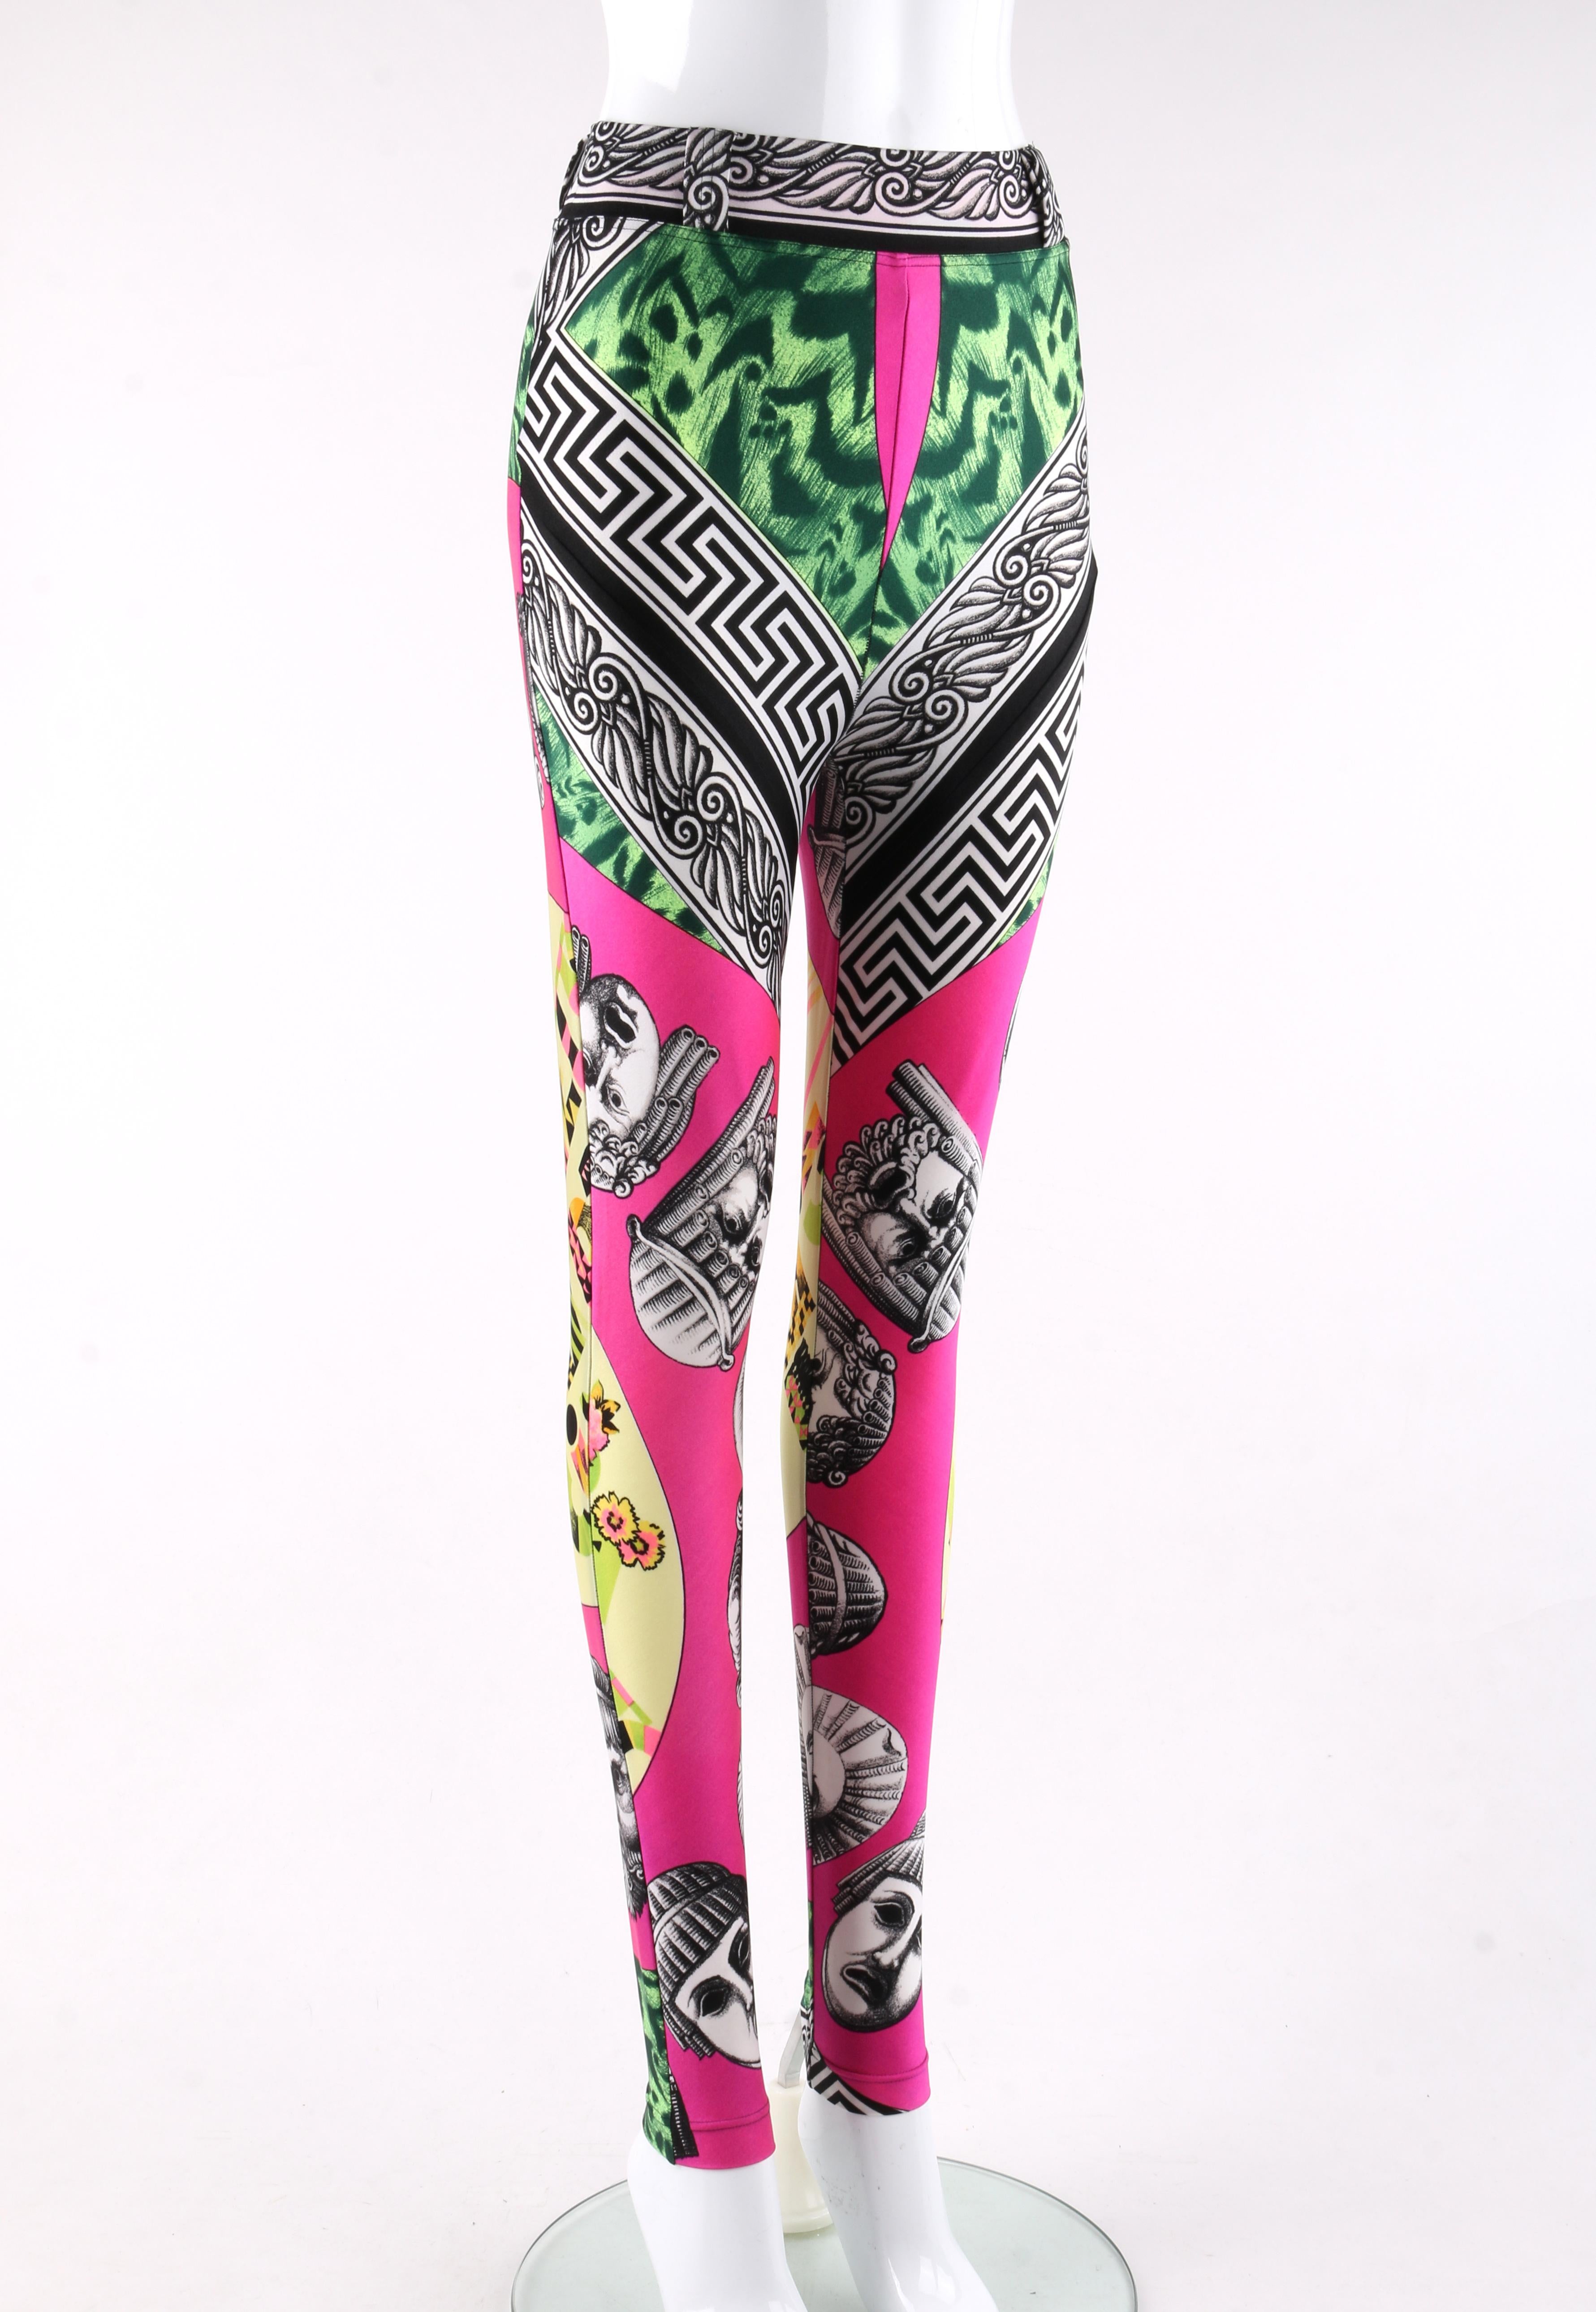 Gianni Versace S/S 1991 “Warhol” Balletto Teatro Print High Waisted Legging 

Circa: 1991 
Brand / Manufacturer: Versace 
Collection: Spring / Summer 1991 “Warhol”
Style: High waisted leggings
Color(s): Shades of pink, green, black, white, yellow